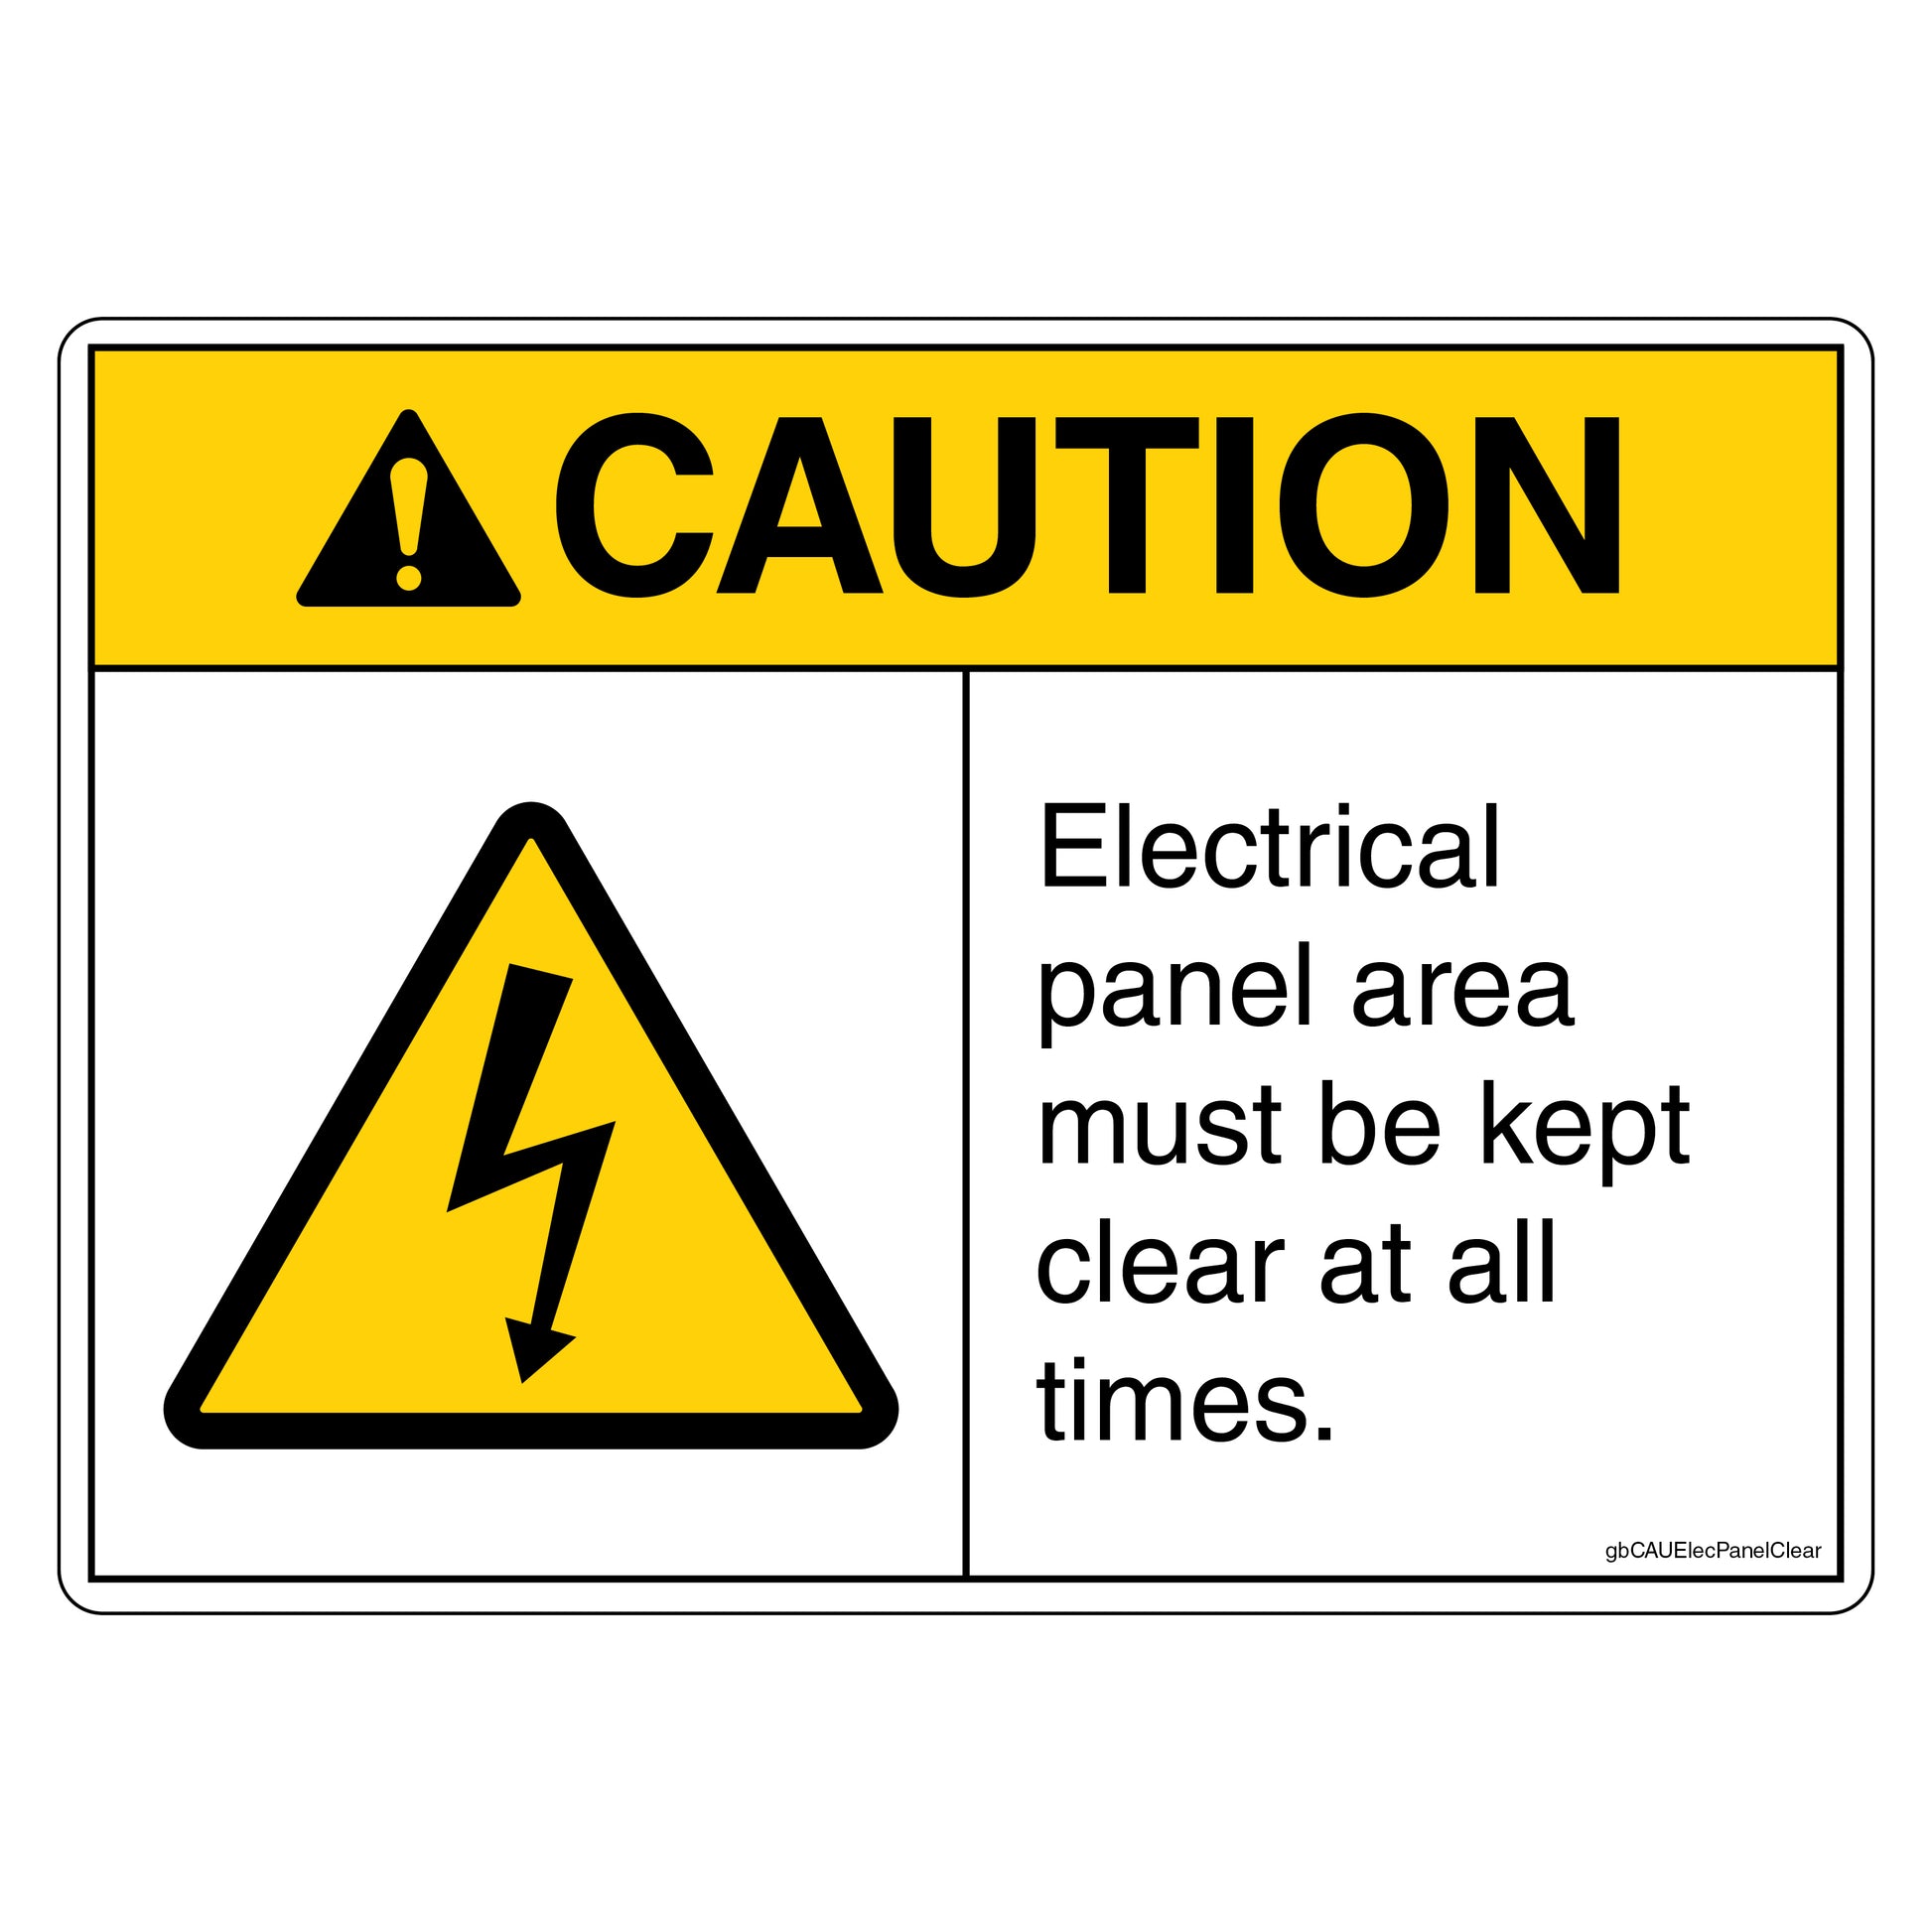 Caution Electrical Panel Area Must Be Kept Clear At All Times Decal. 